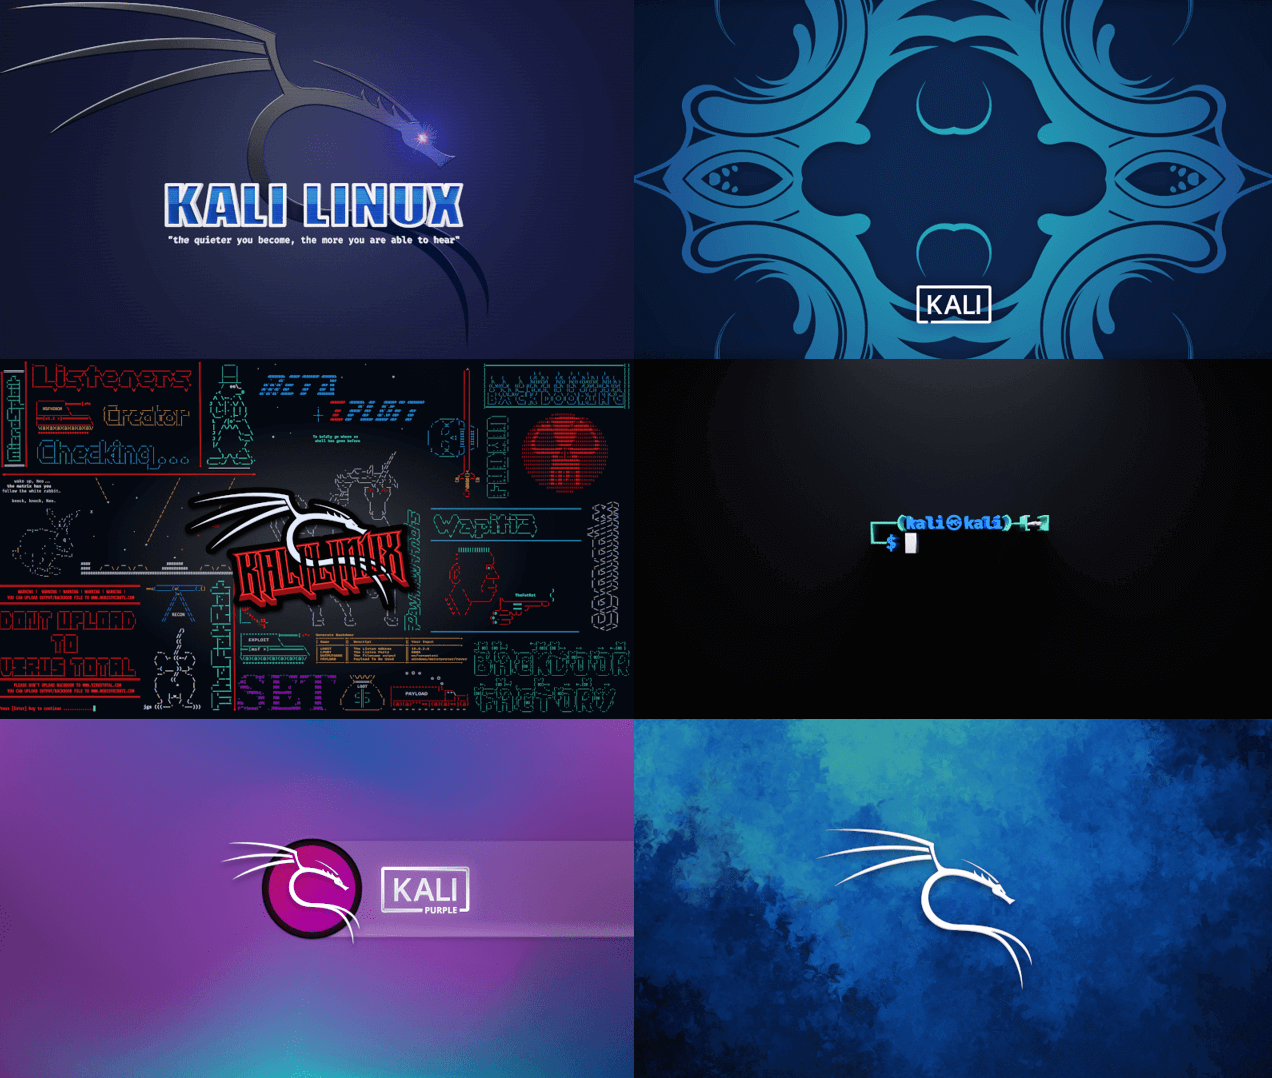 the new wallpapers offered with kali linux 2023.1 and kali purple